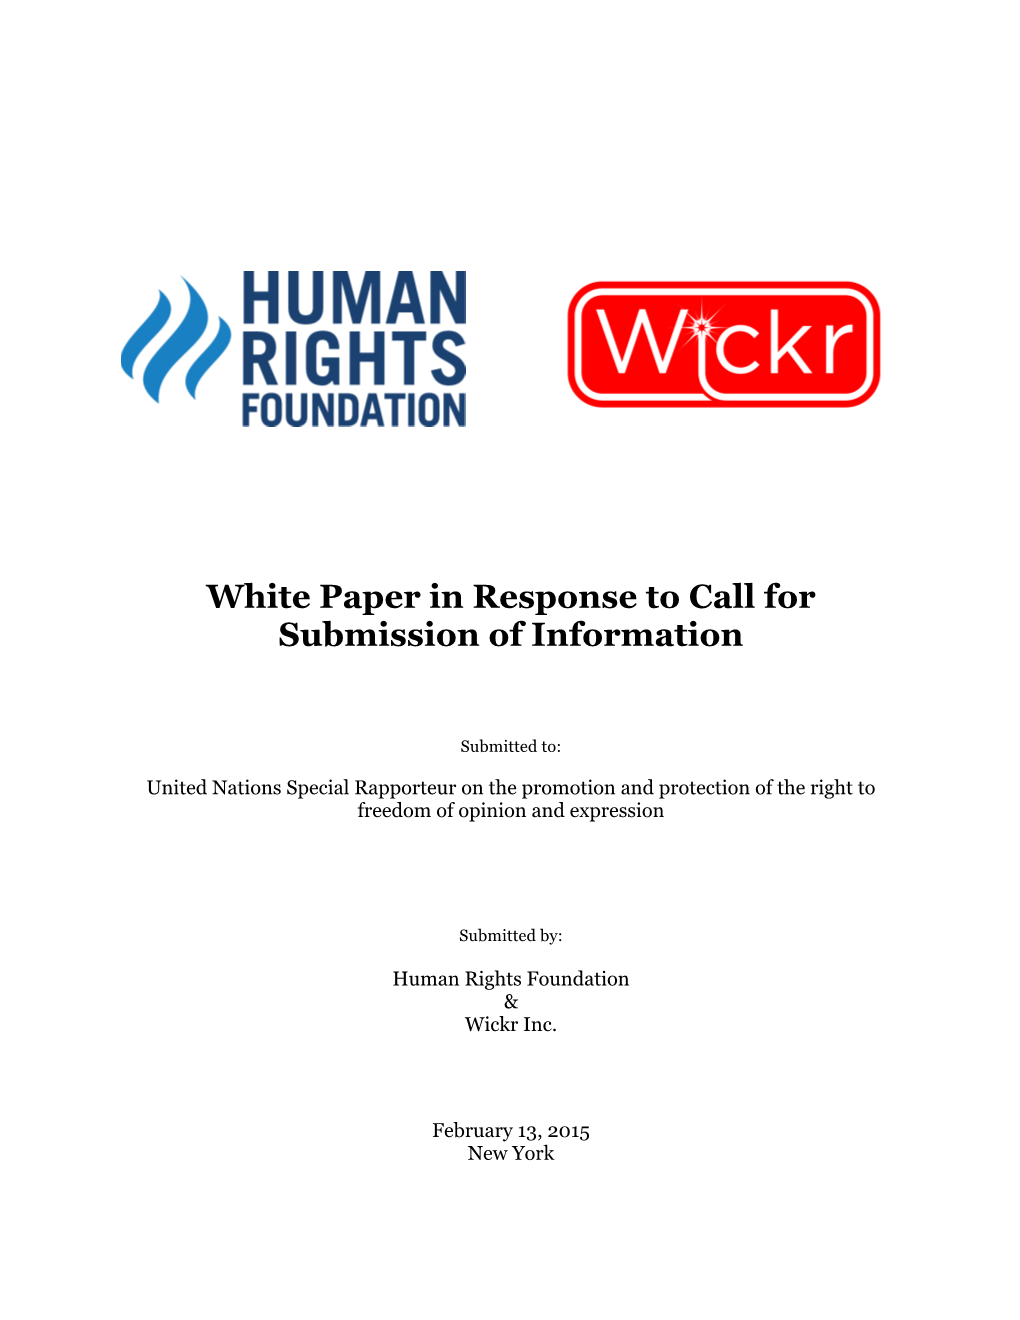 Human Rights Foundation and Wickr to Submit Information